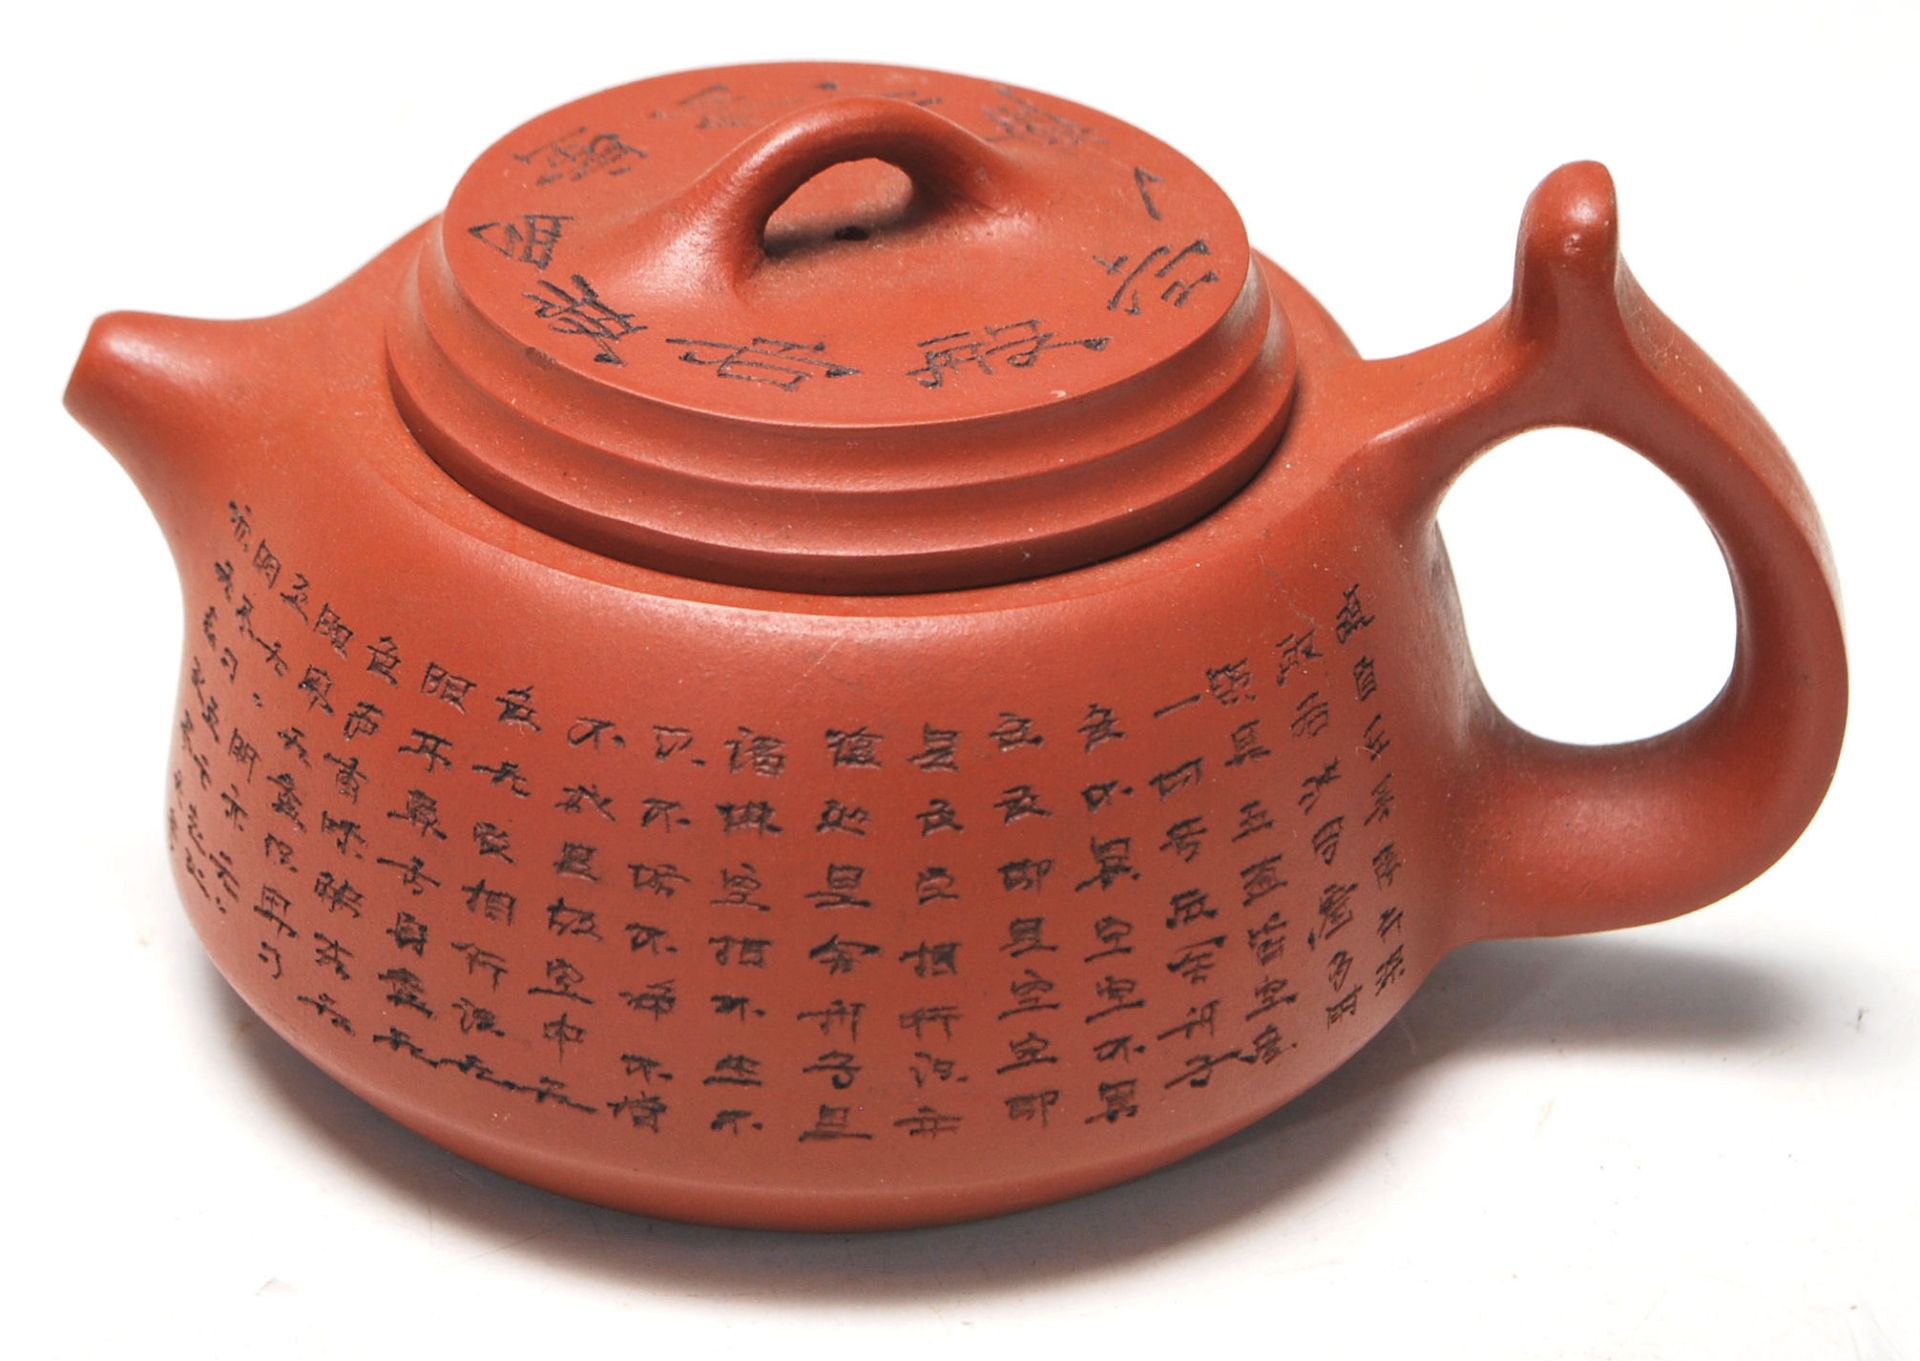 MID 20TH CENTURY CHINESE YIXING RED CLAY TEAPOT